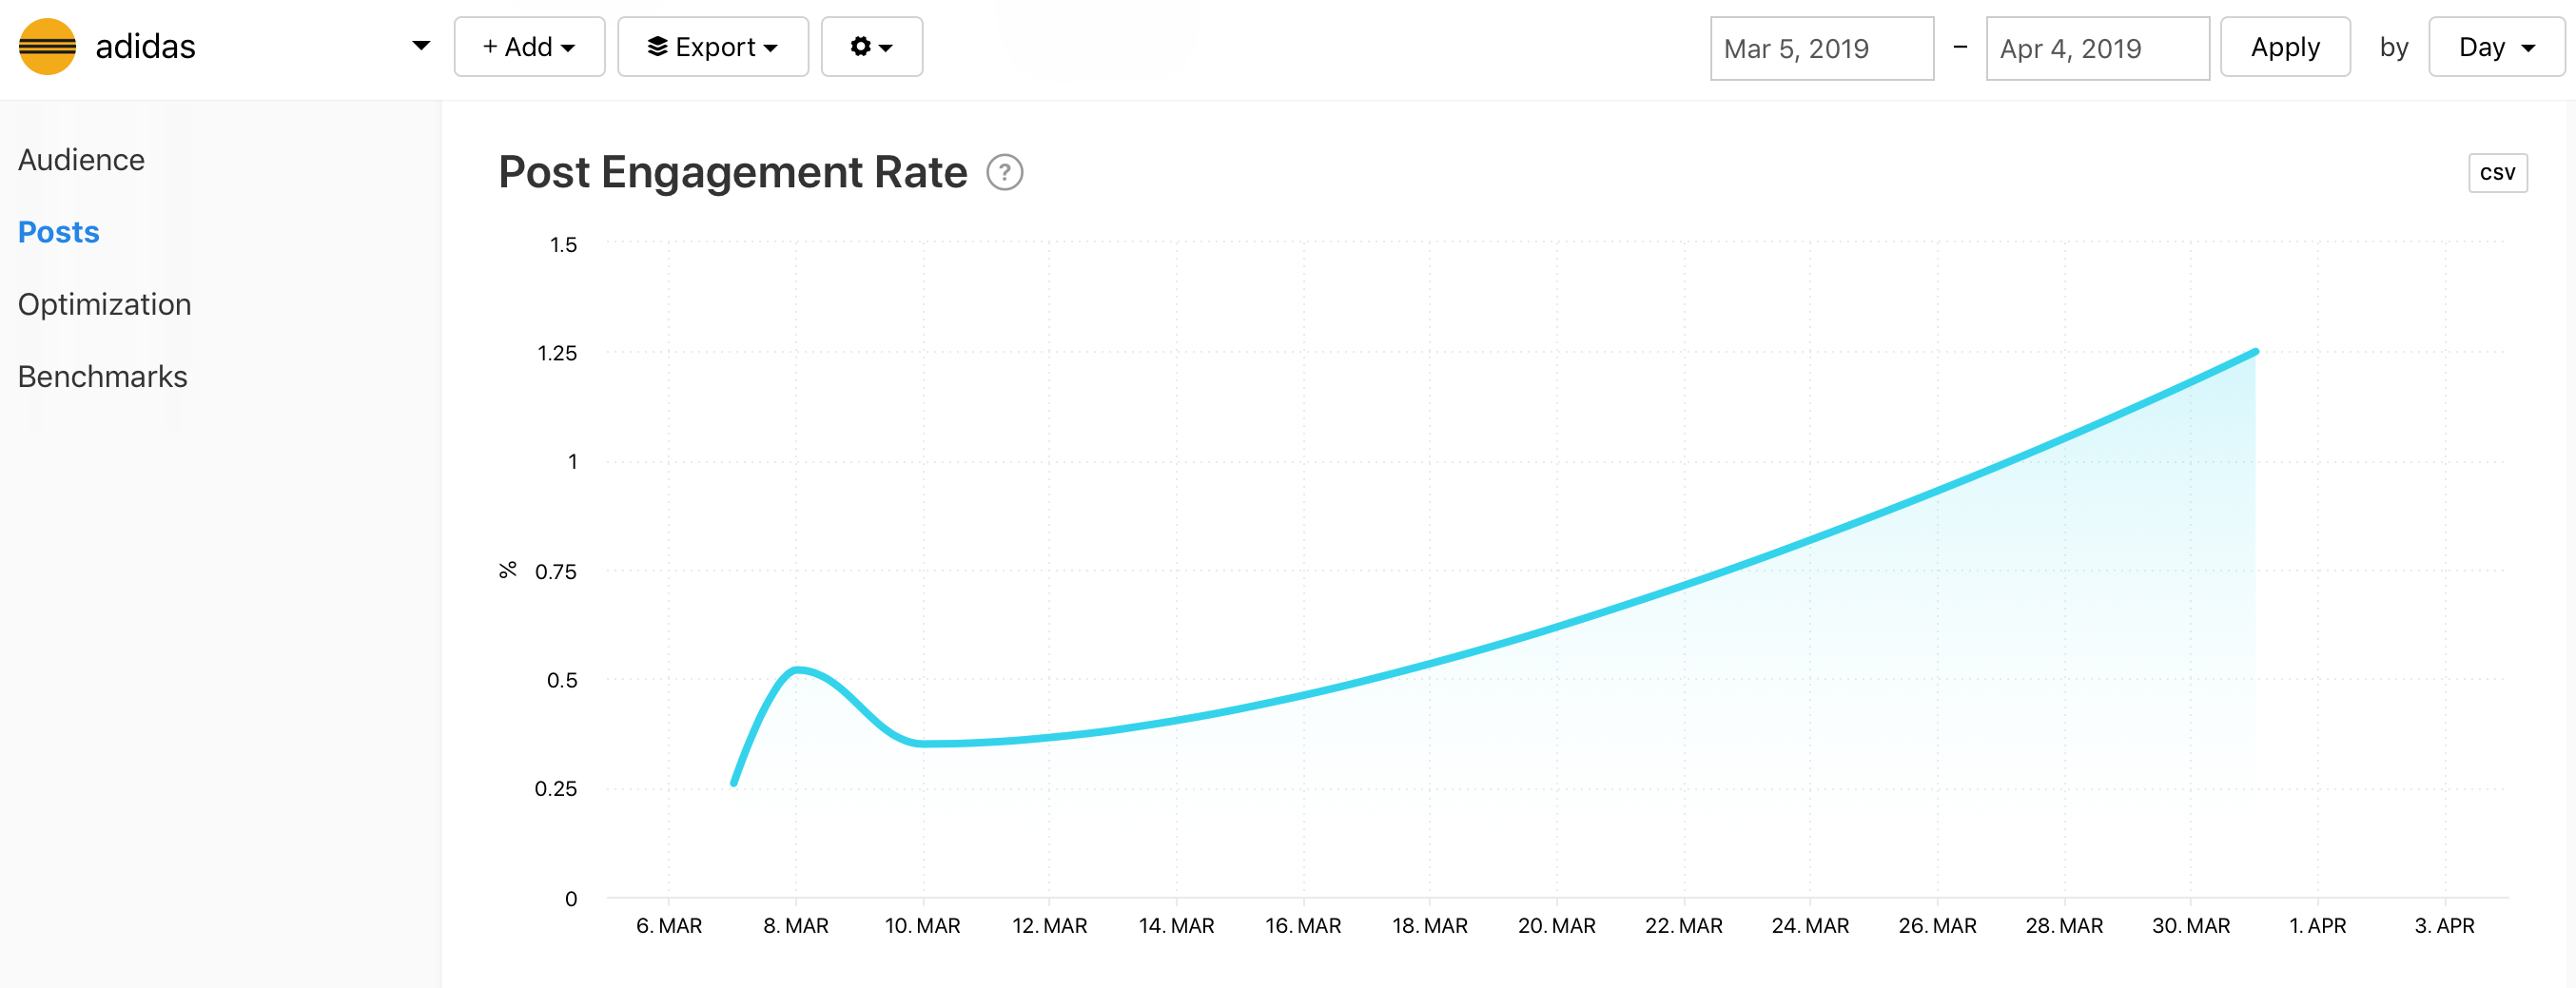 Post Engagement Rate of @adidas — graph by Minter.io